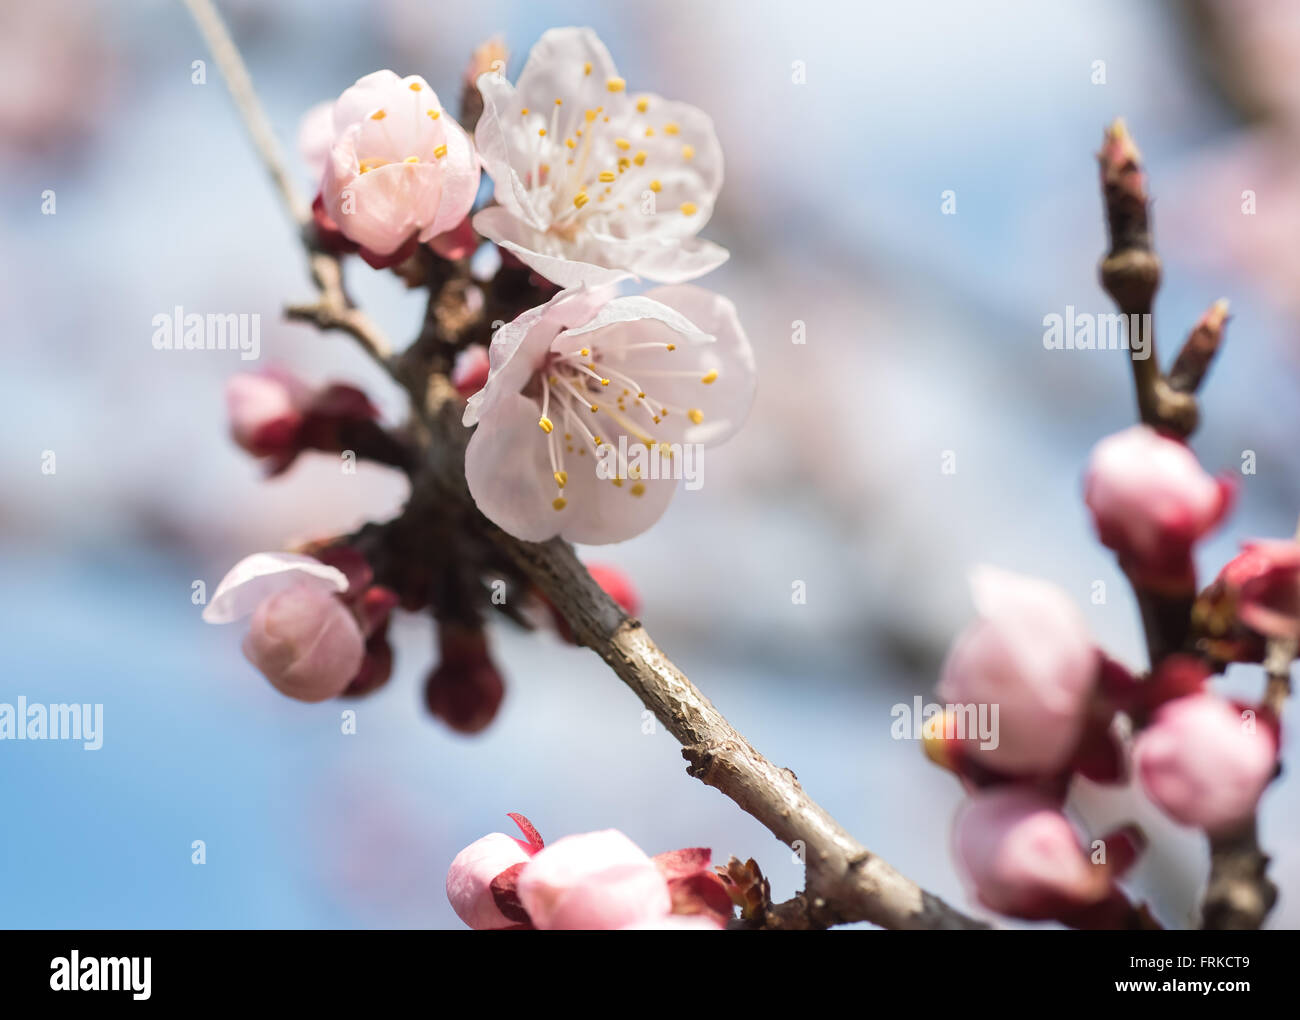 apricot flowers over blurred background Stock Photo